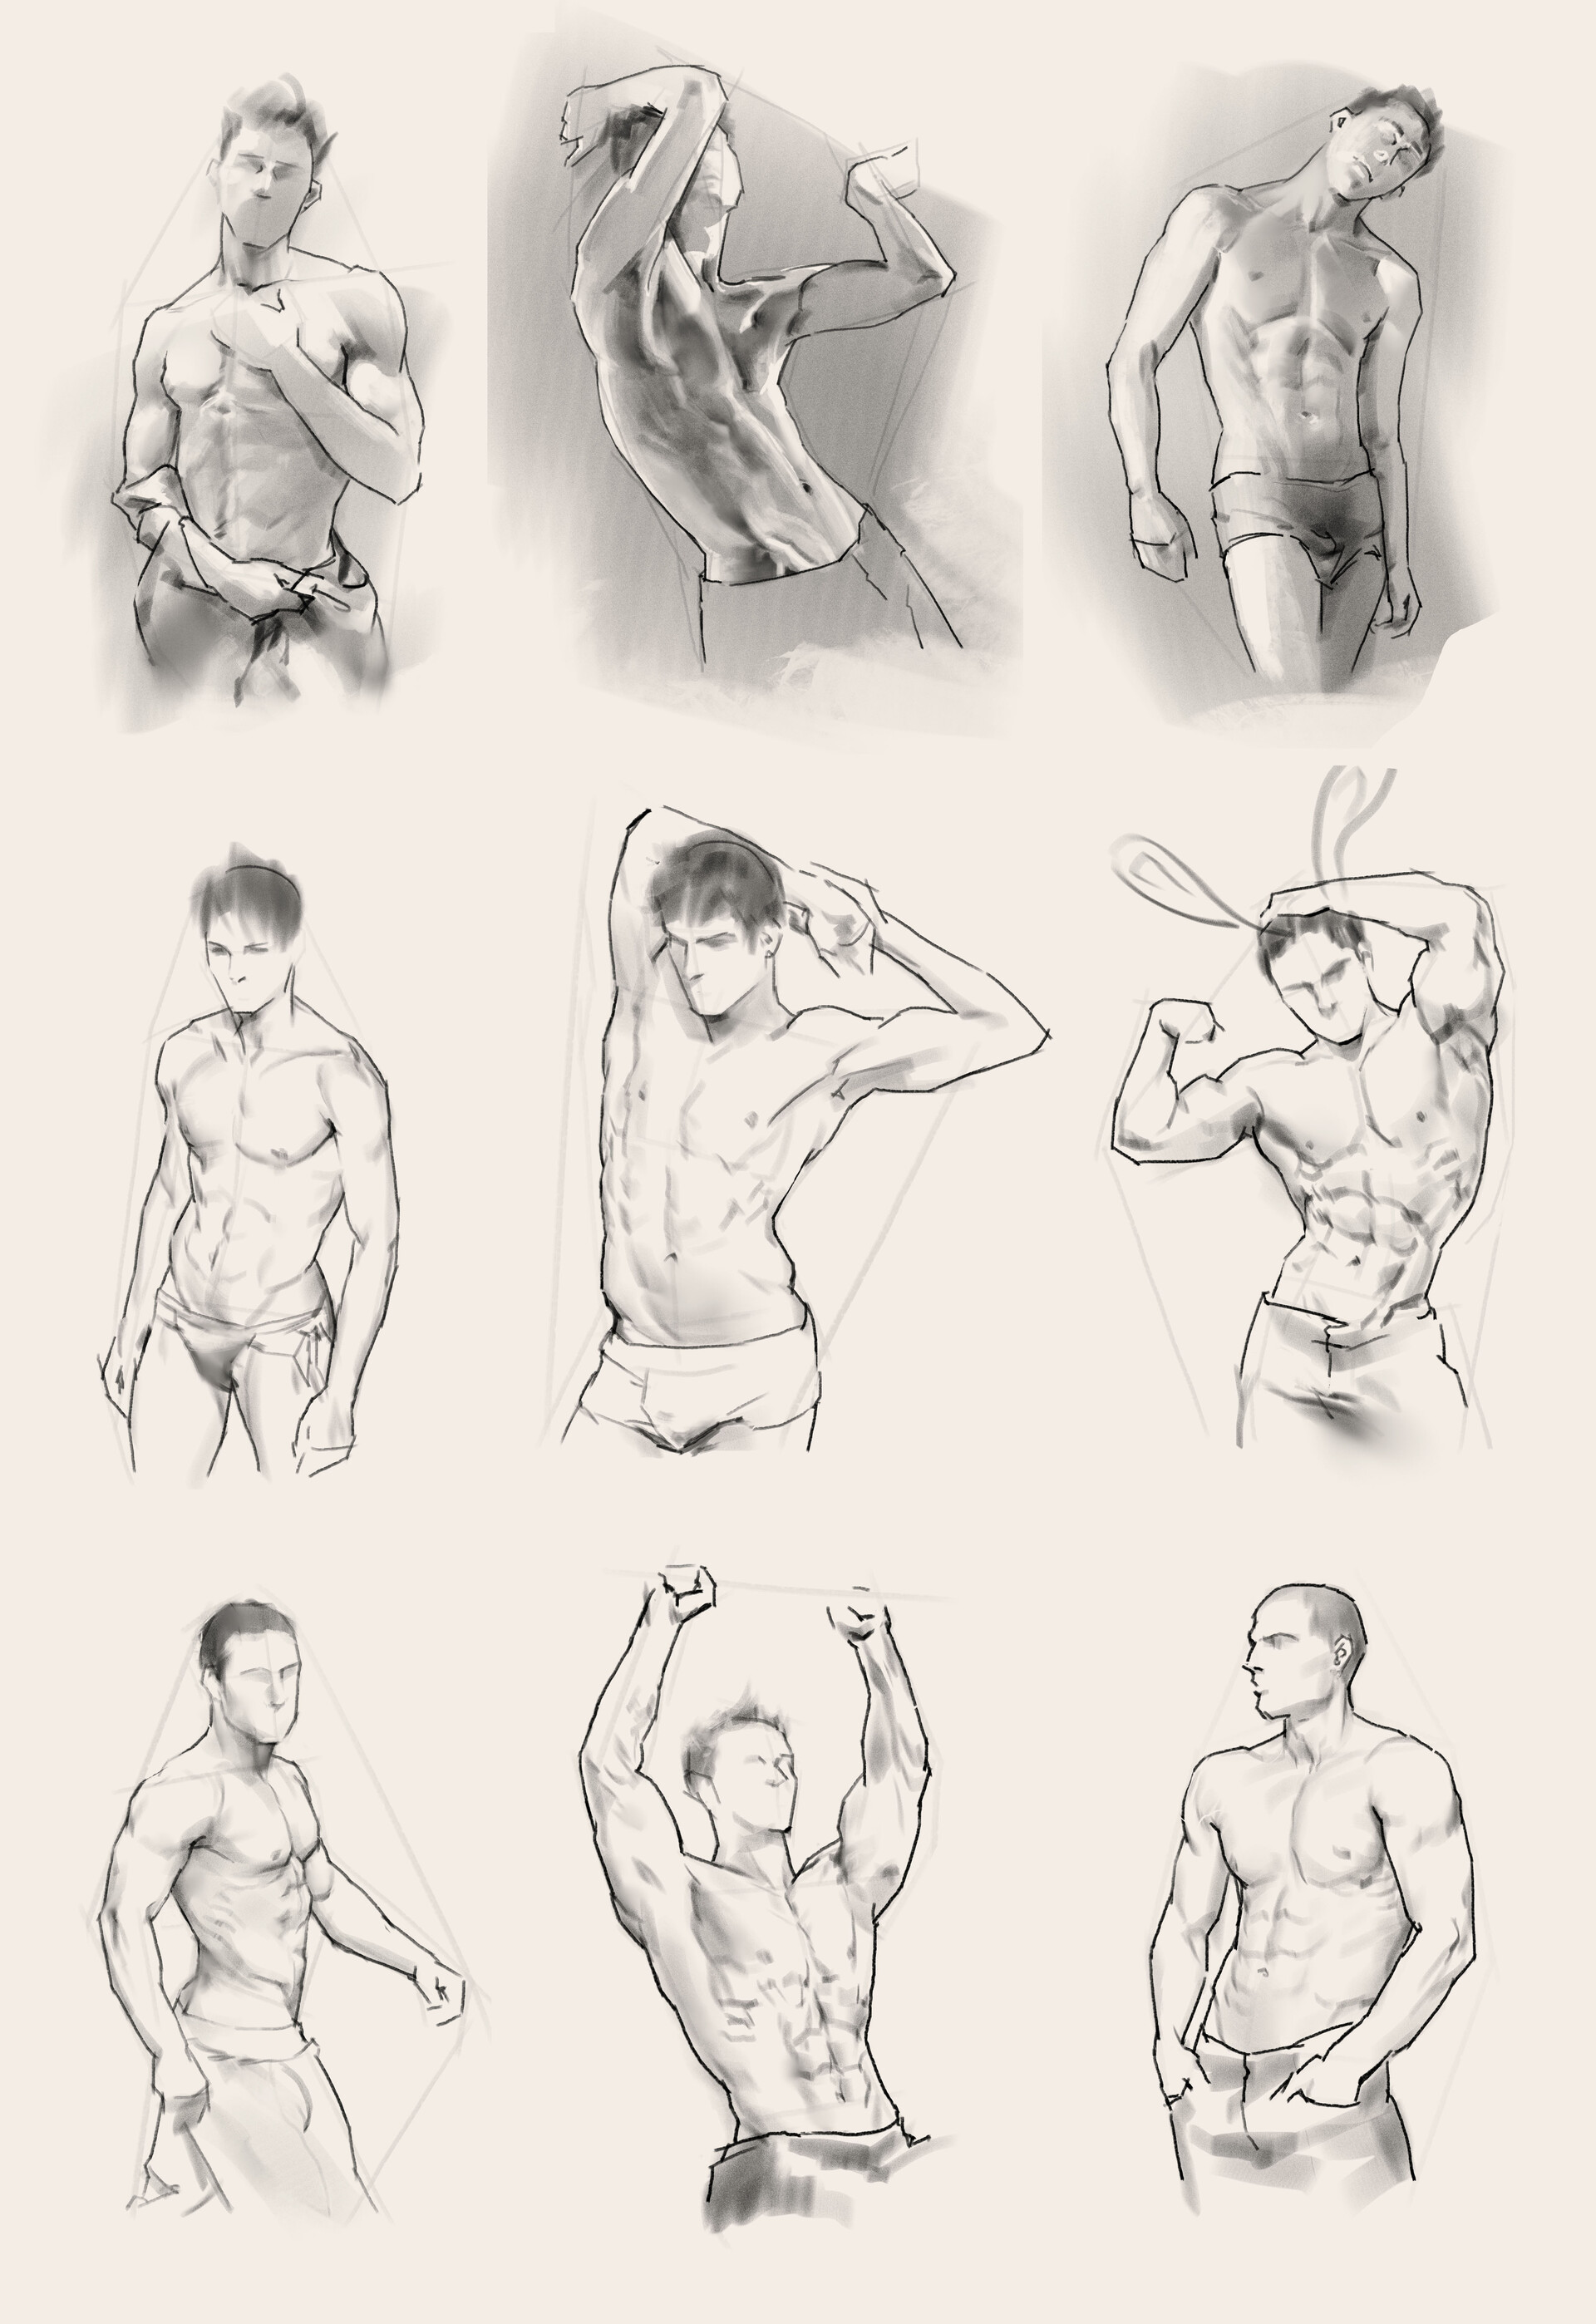 29614 Male Body Sketch Images Stock Photos  Vectors  Shutterstock